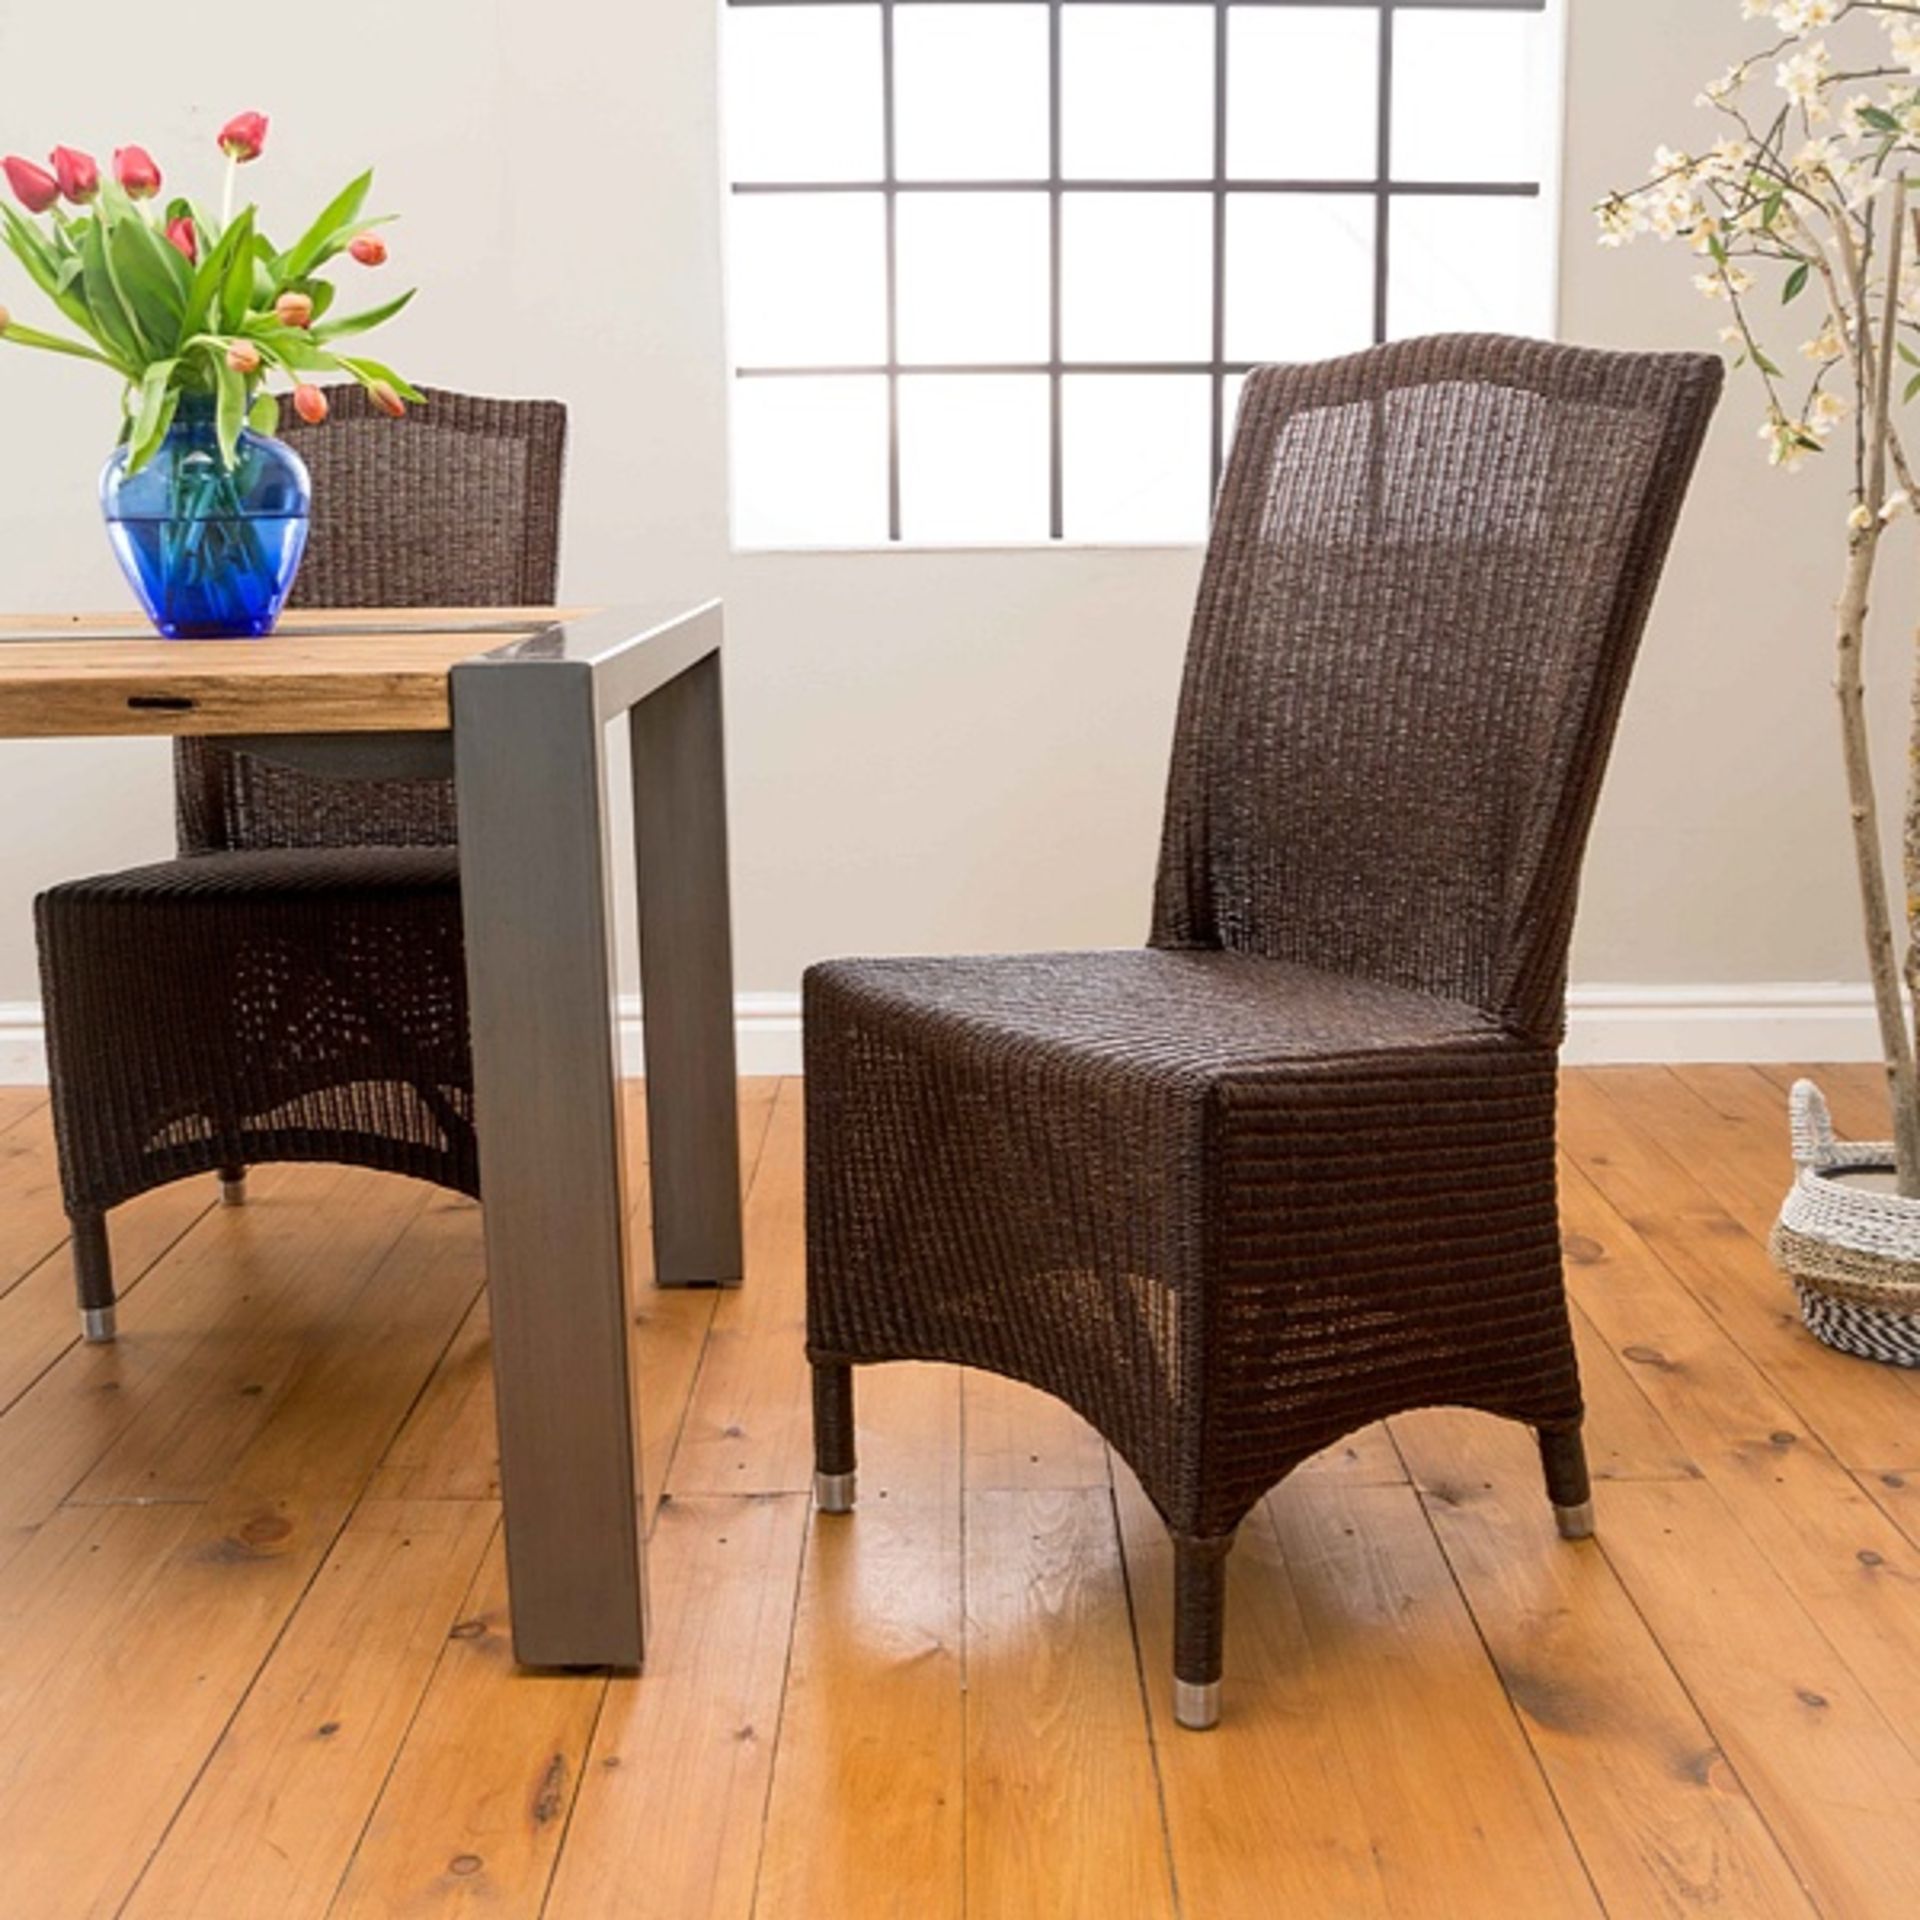 A Pair Of Classic Lloyd Loom Chairs The Pimlico Is At Home In The Dining Room And Comfortable As A - Image 4 of 5